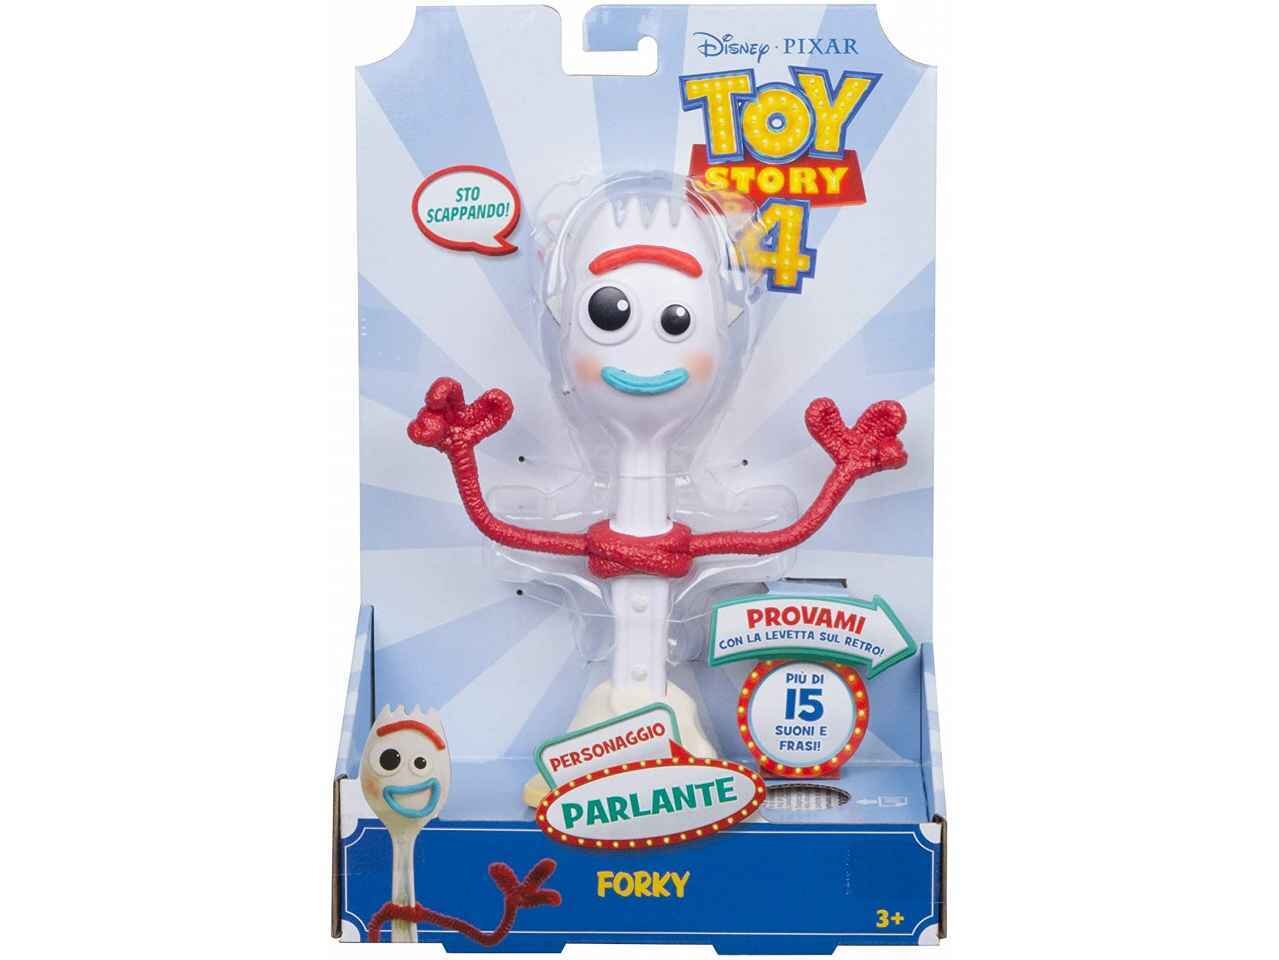 TOY STORY 4 FORKY PARLANTE GMW49